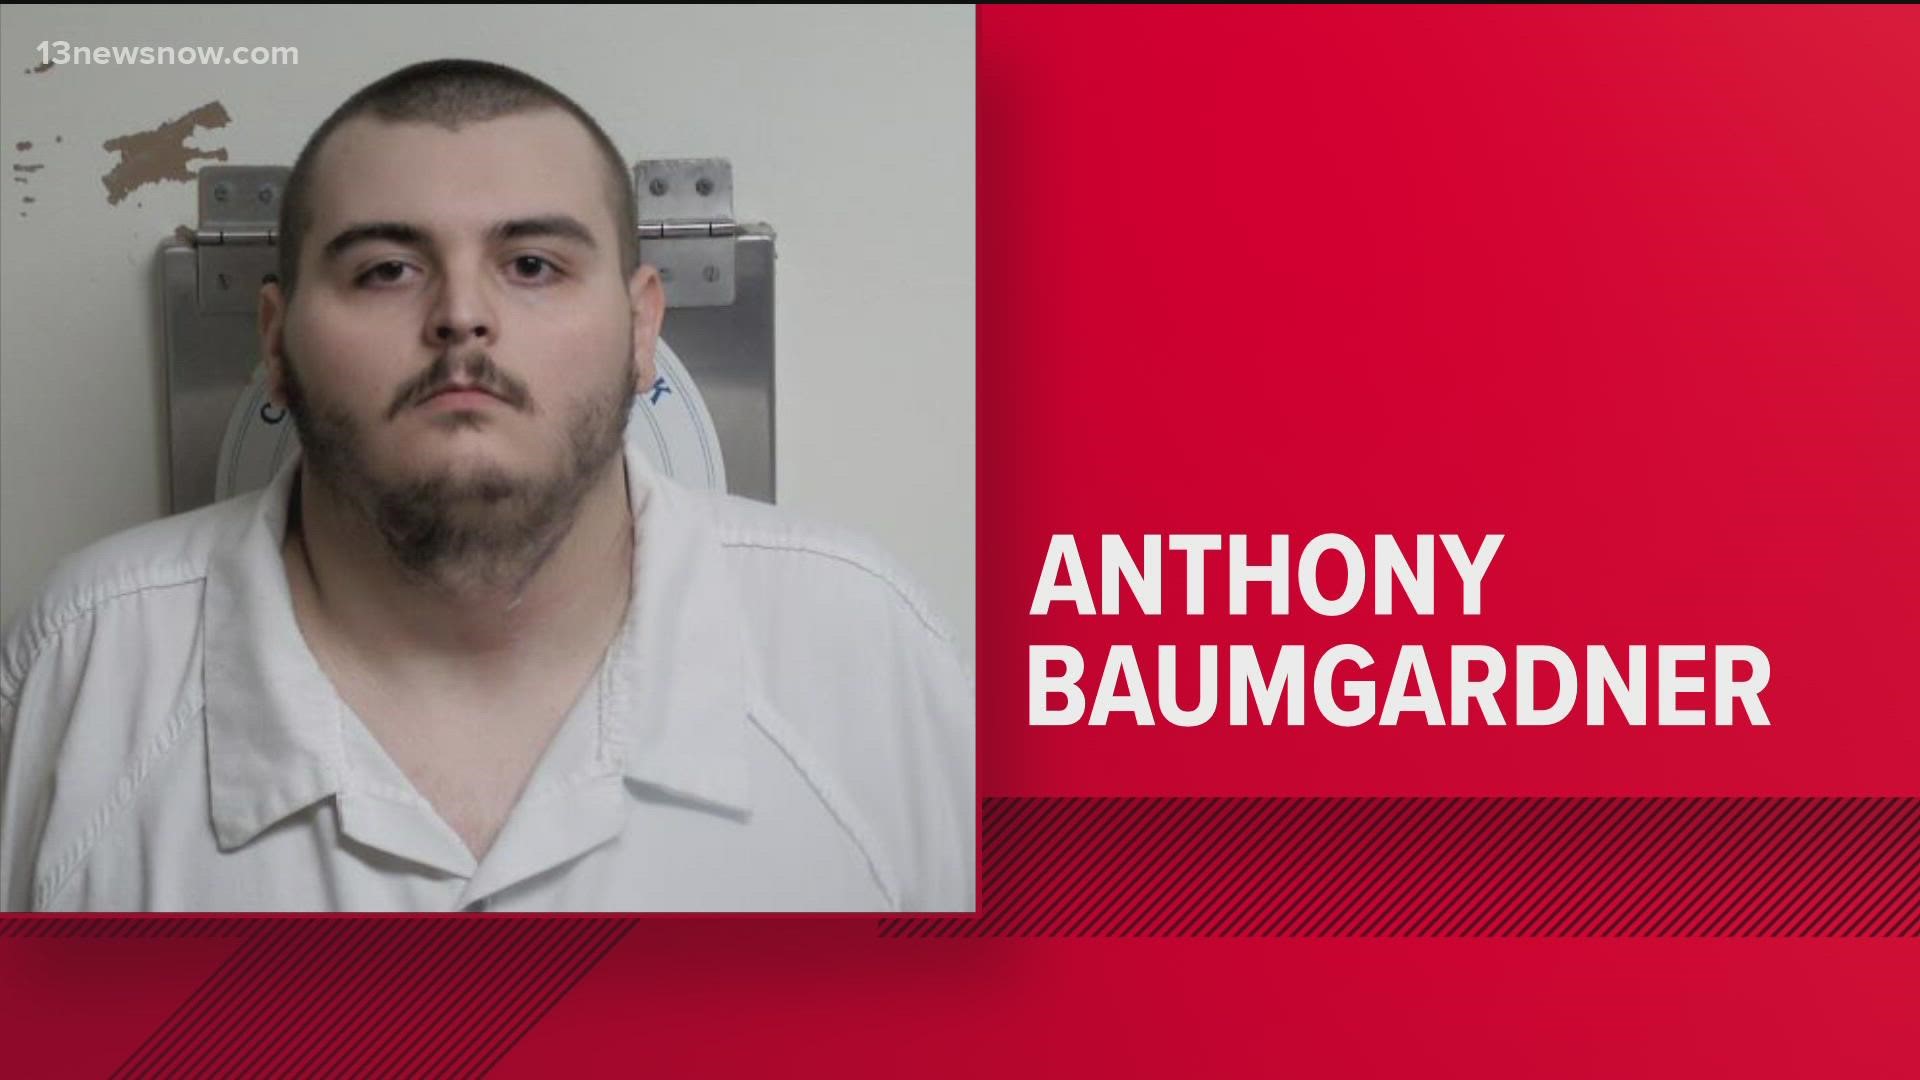 The Accomack County Sheriff's Offices says Anthony Baumgardner opened fire on deputes Wednesday afternoon after they responded to a call about a domestic dispute.